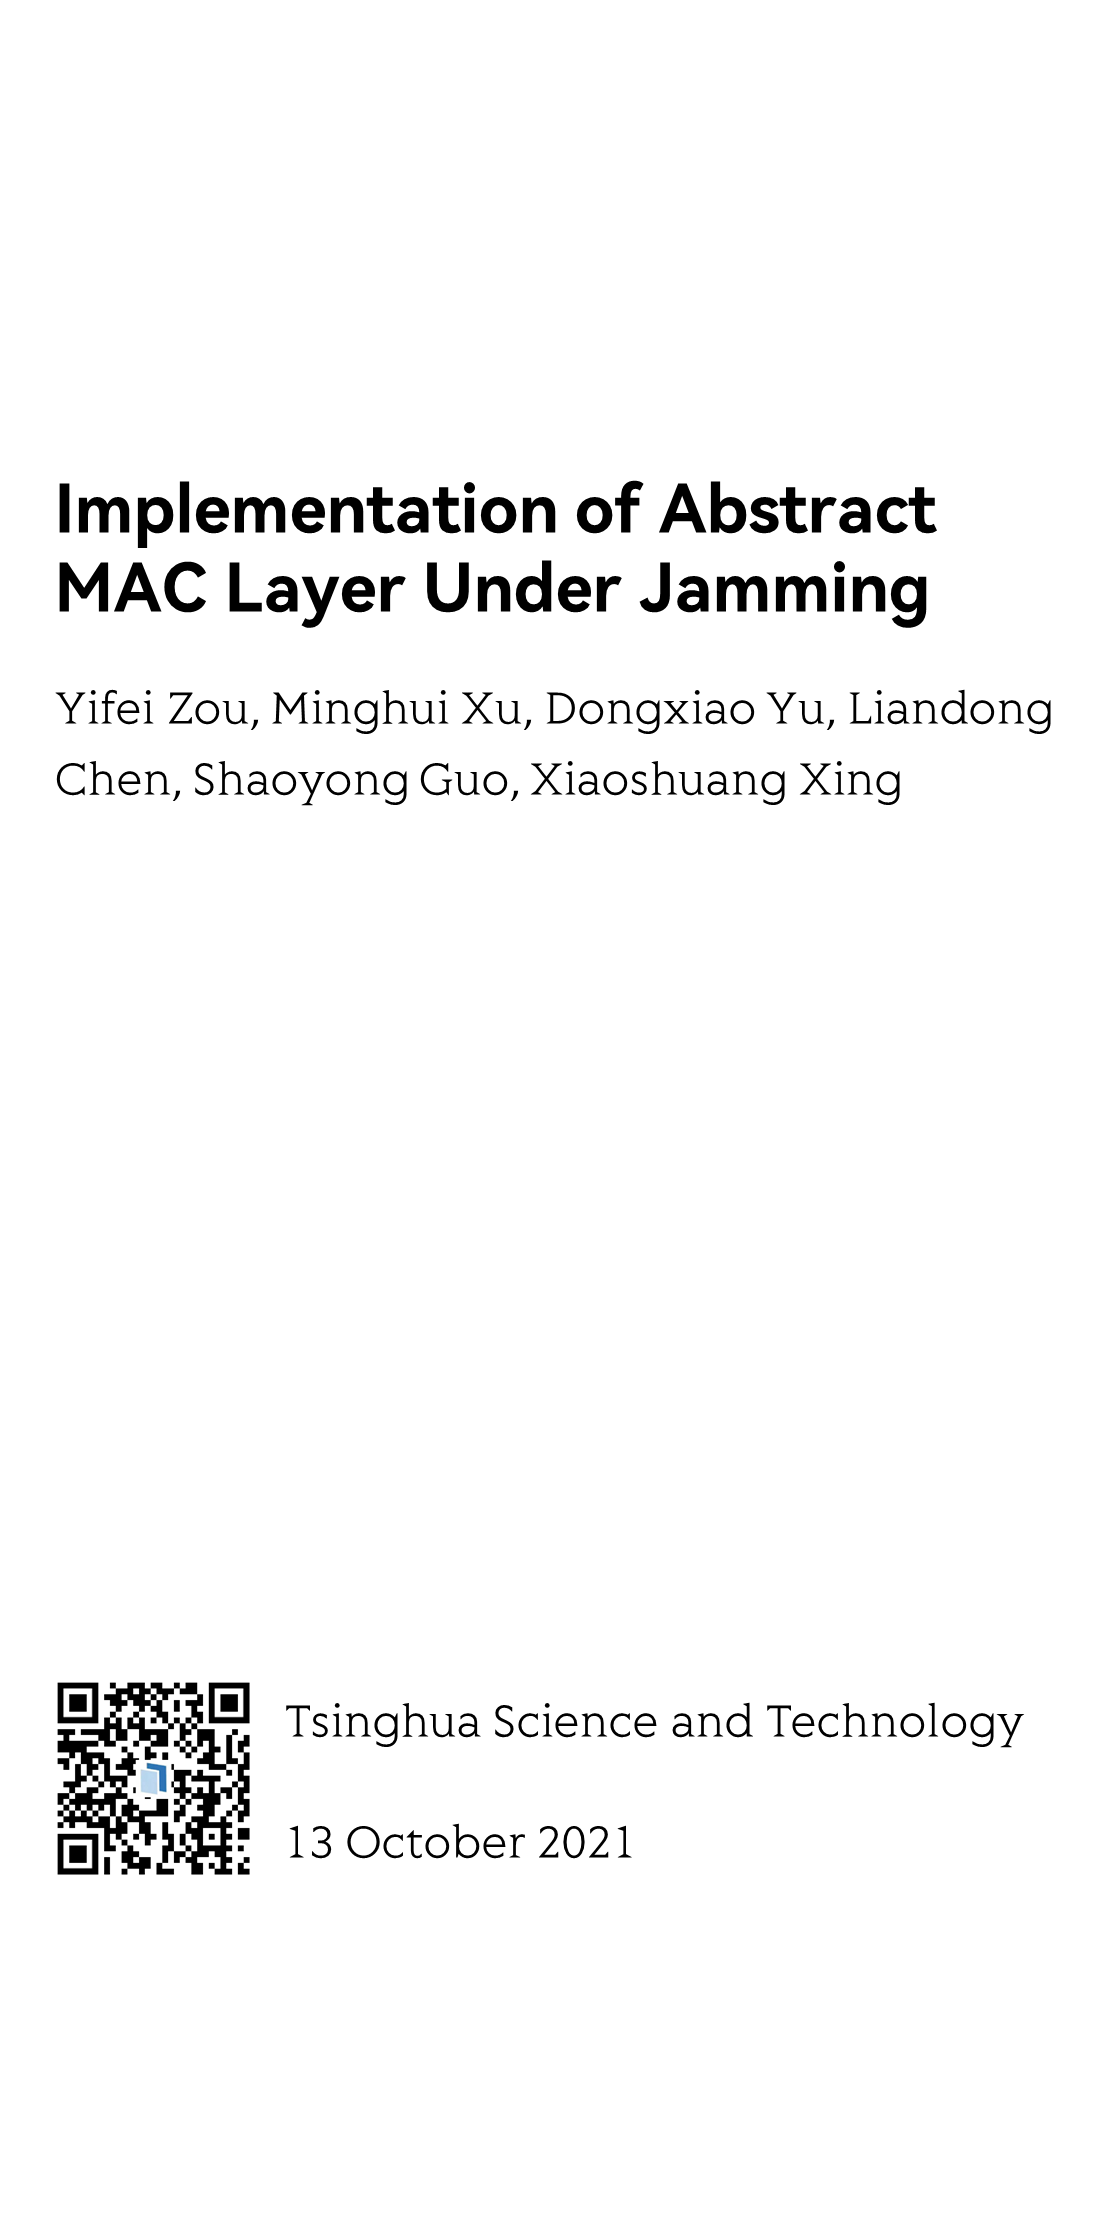 Implementation of Abstract MAC Layer Under Jamming_1